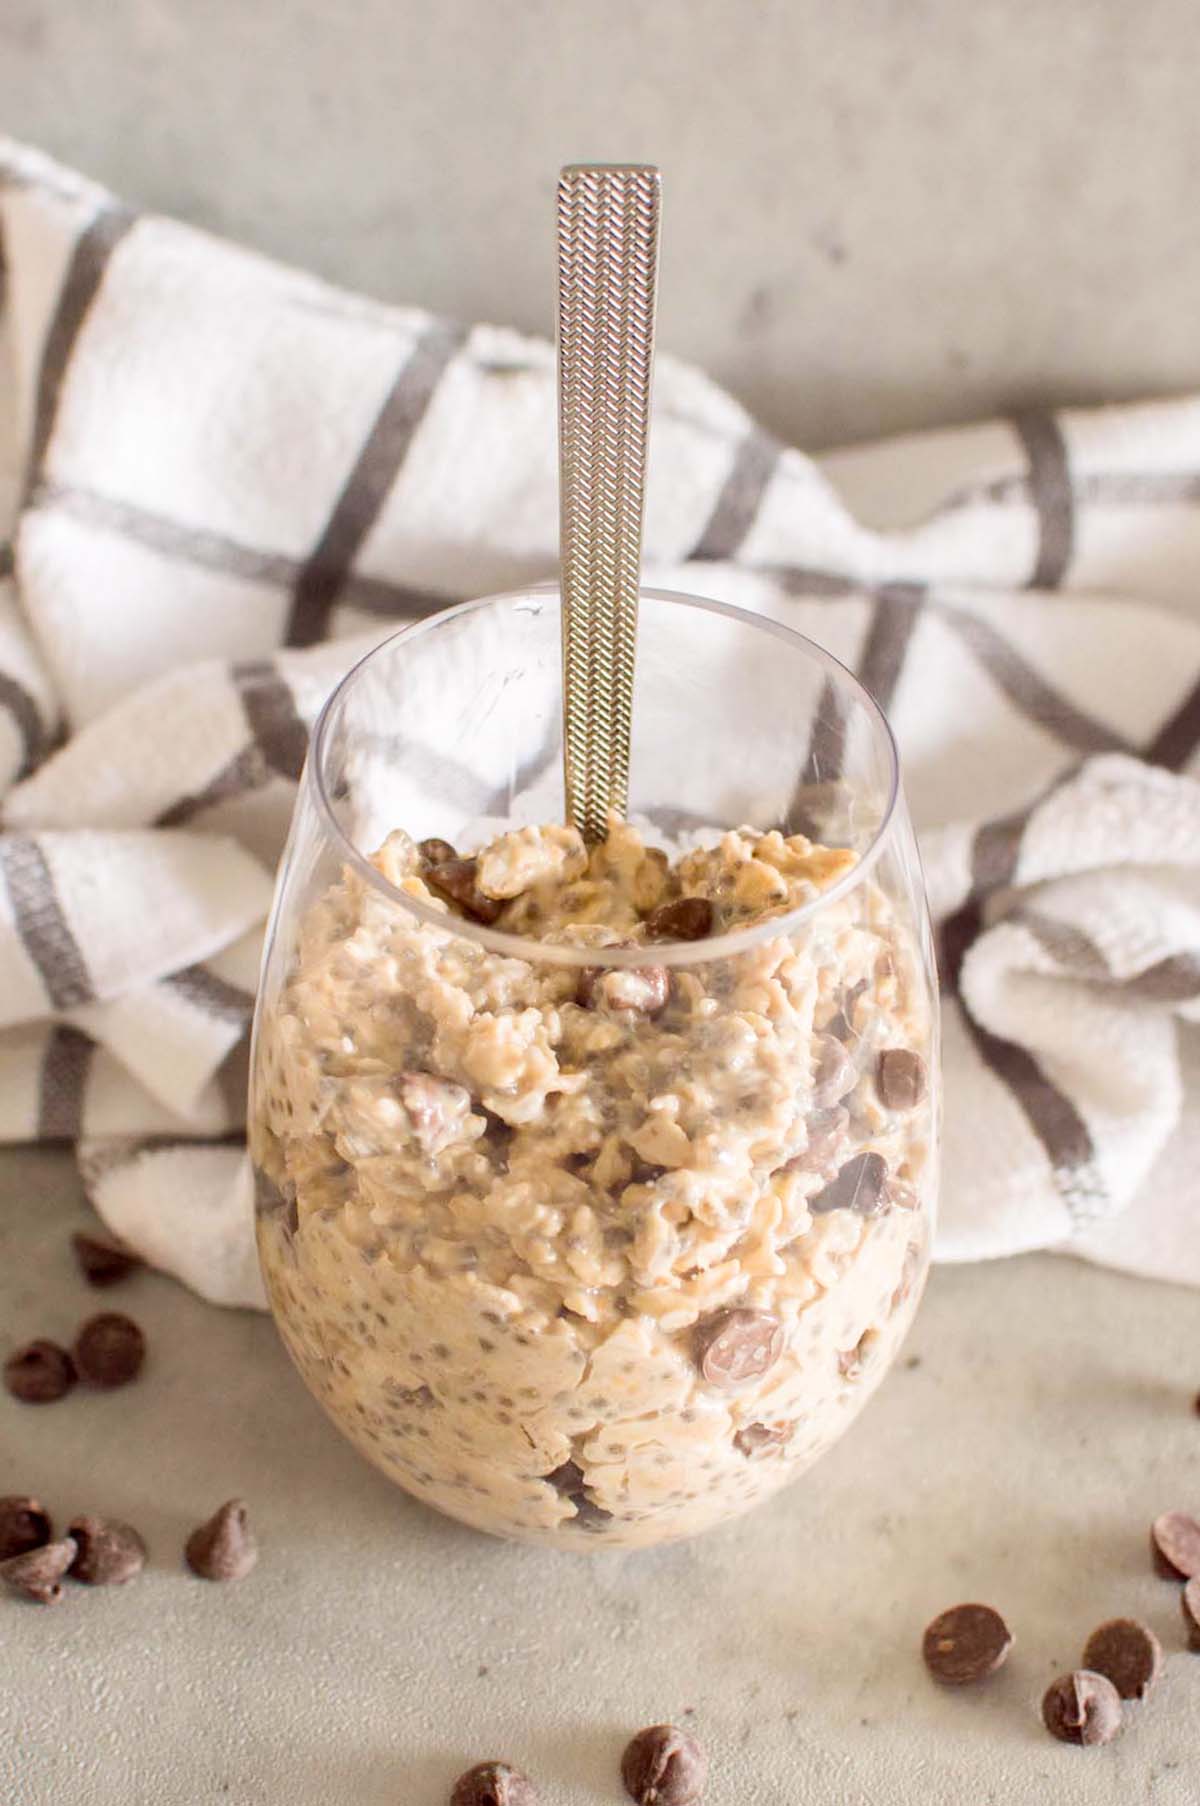 overnight oats in a glass with a spoon.